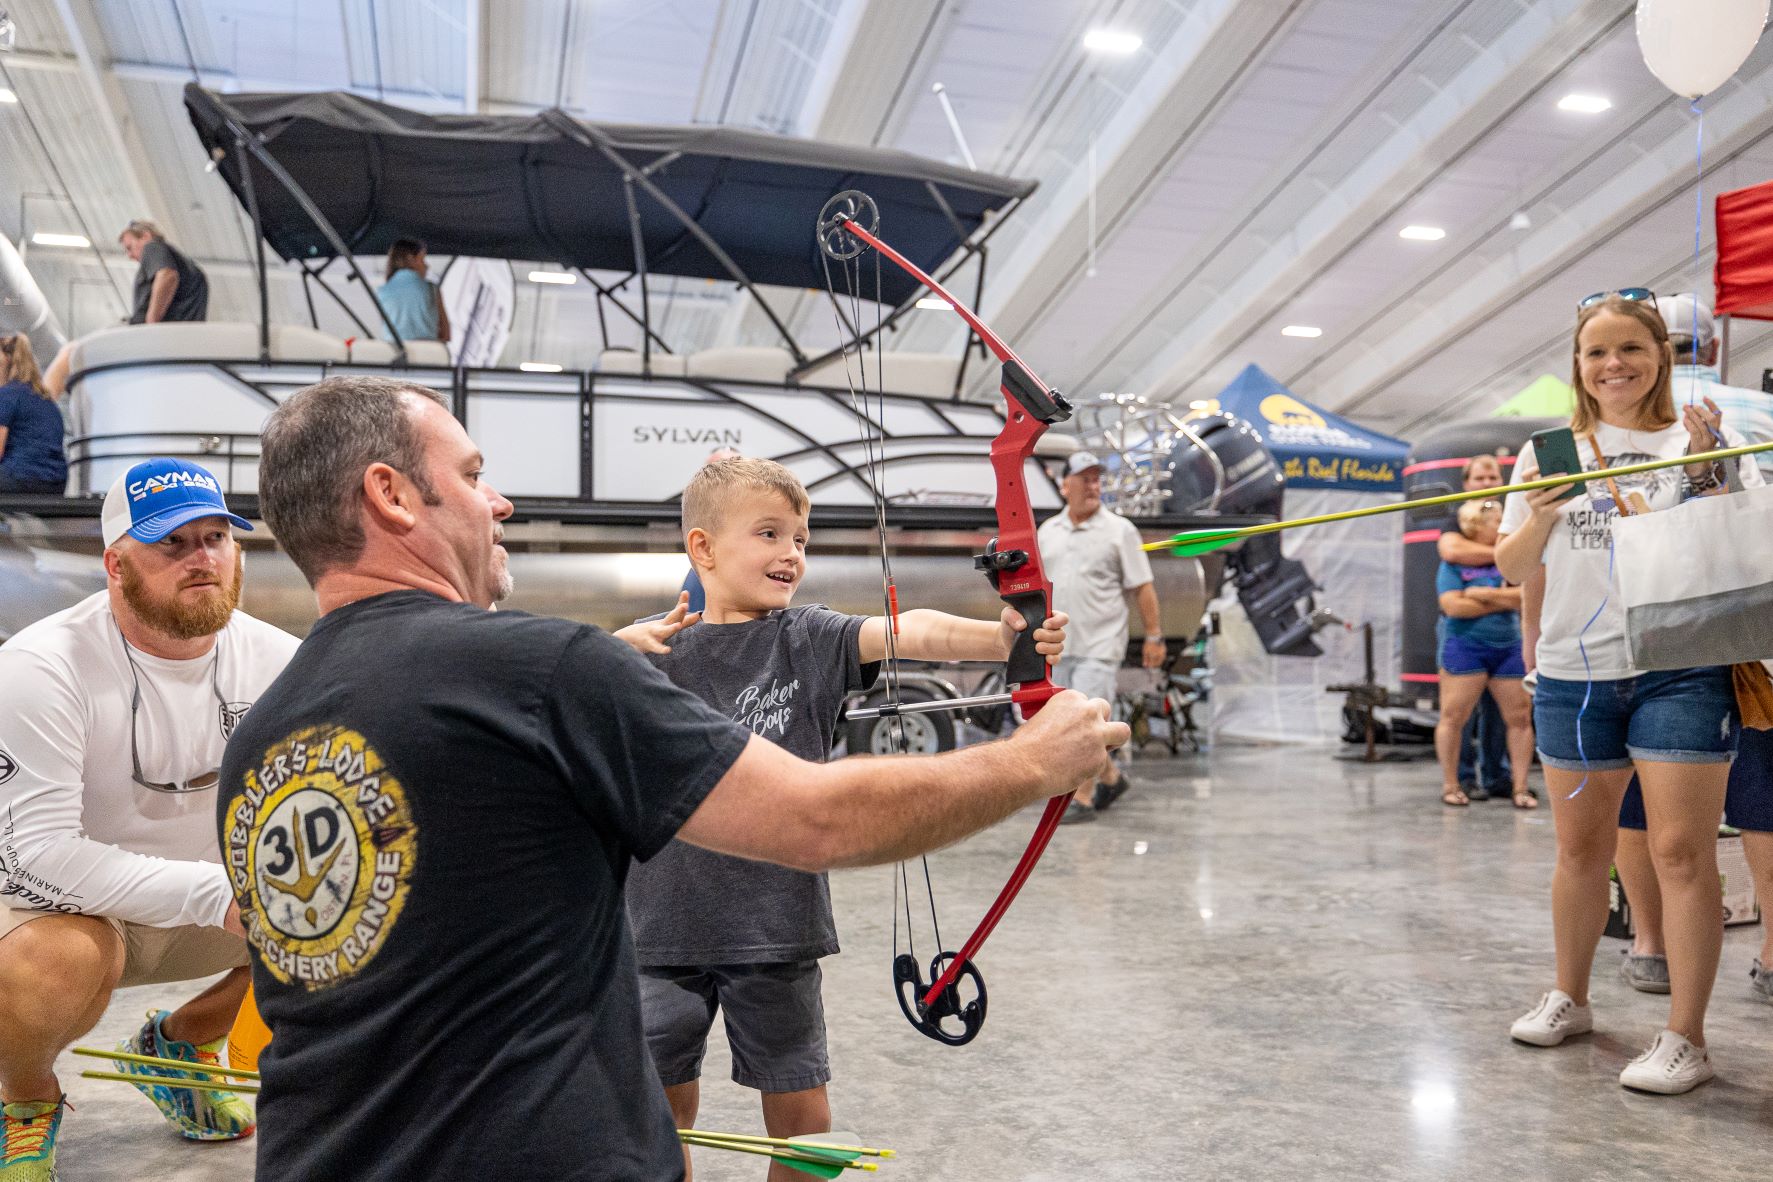 A staff member assists a young boy with his archery grip. 